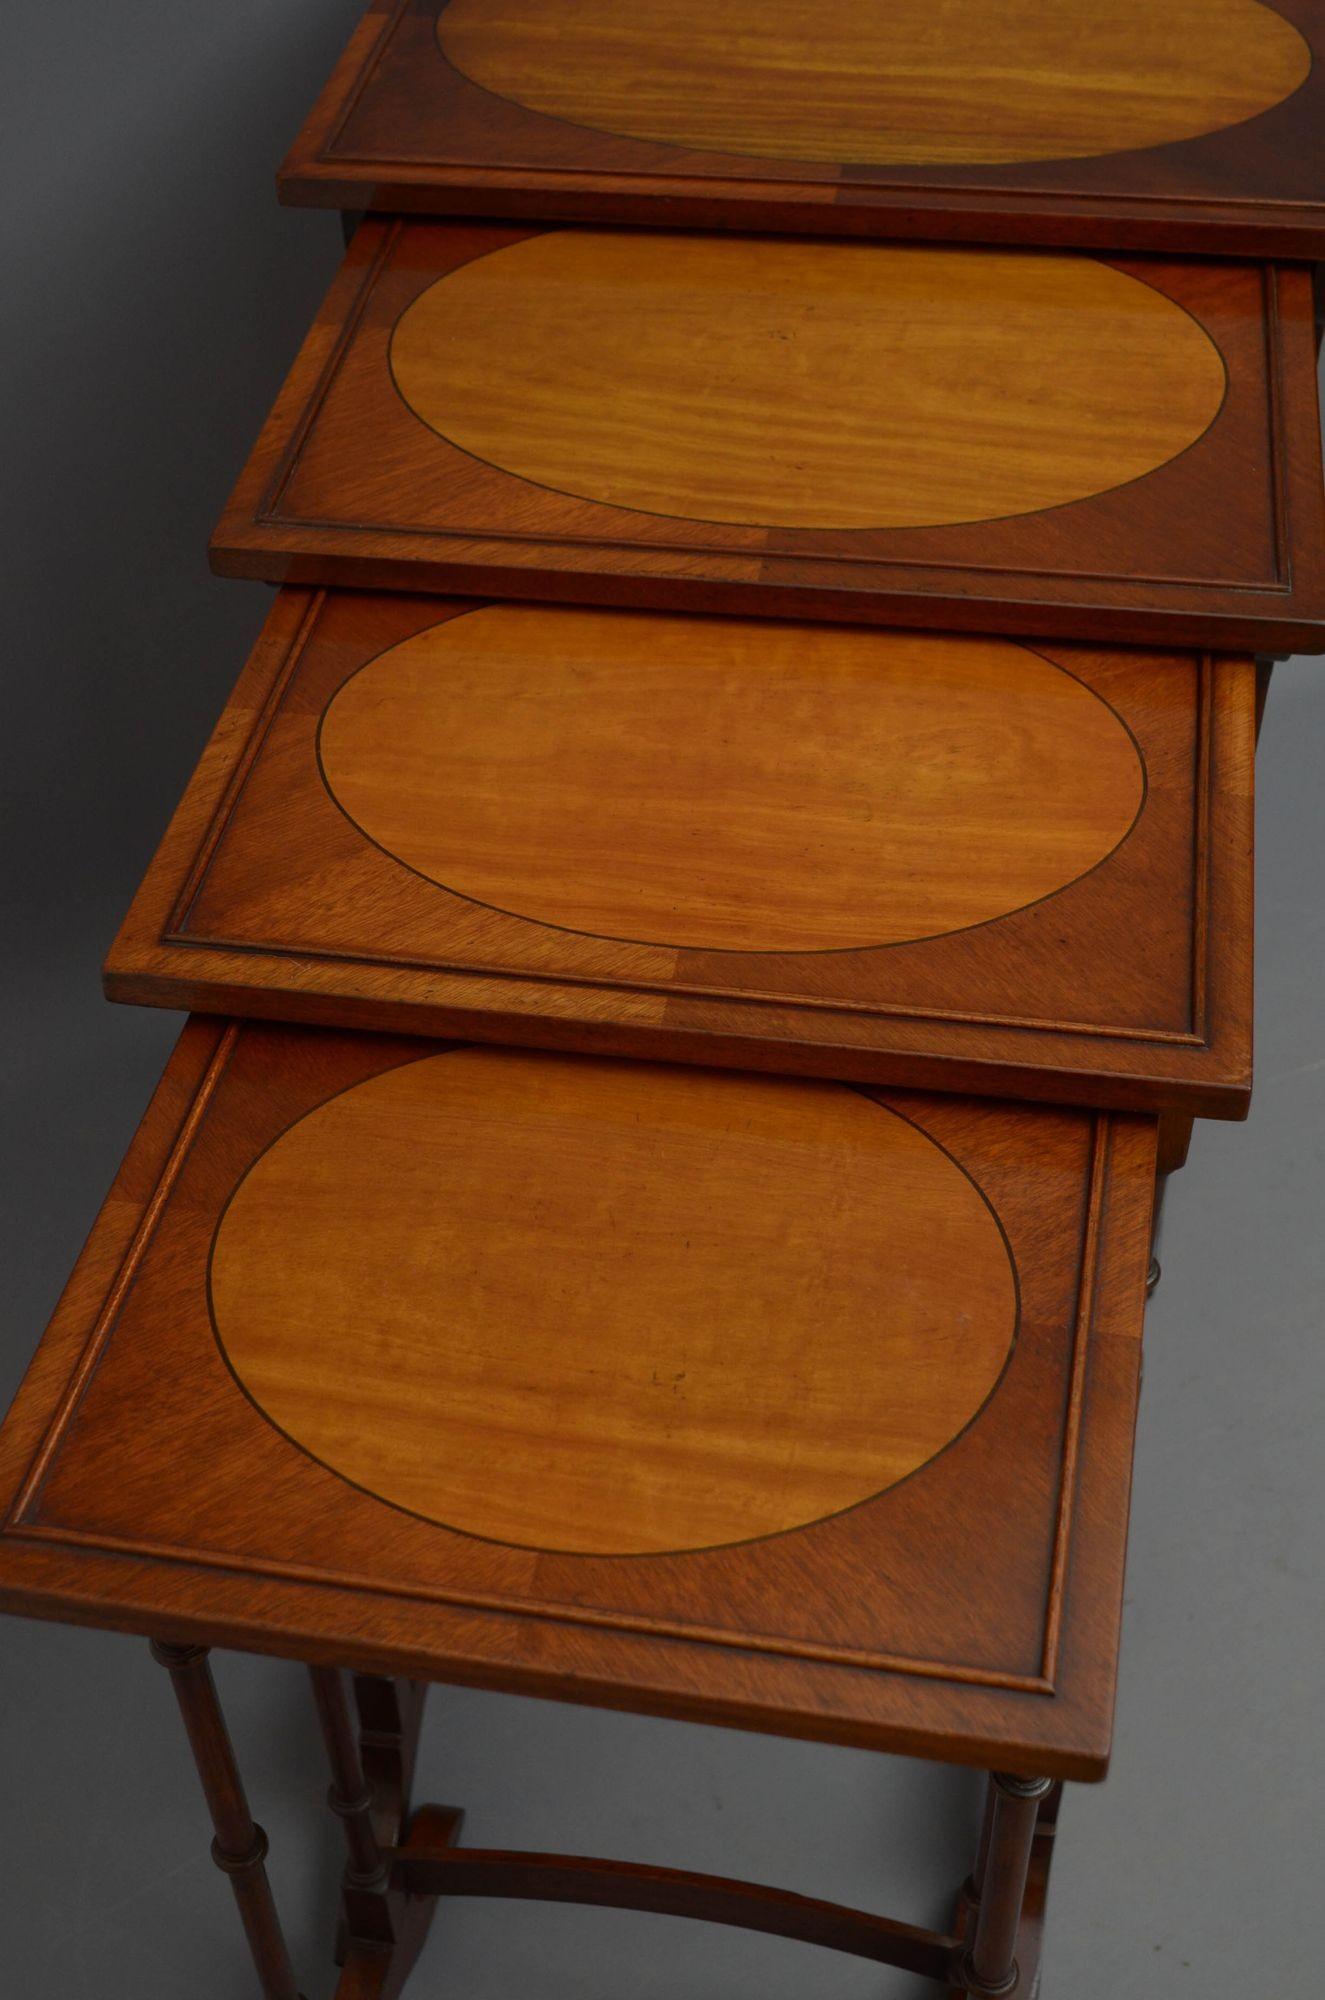 20th Century Edwardian Mahogany and Satinwood Nest of Tables For Sale